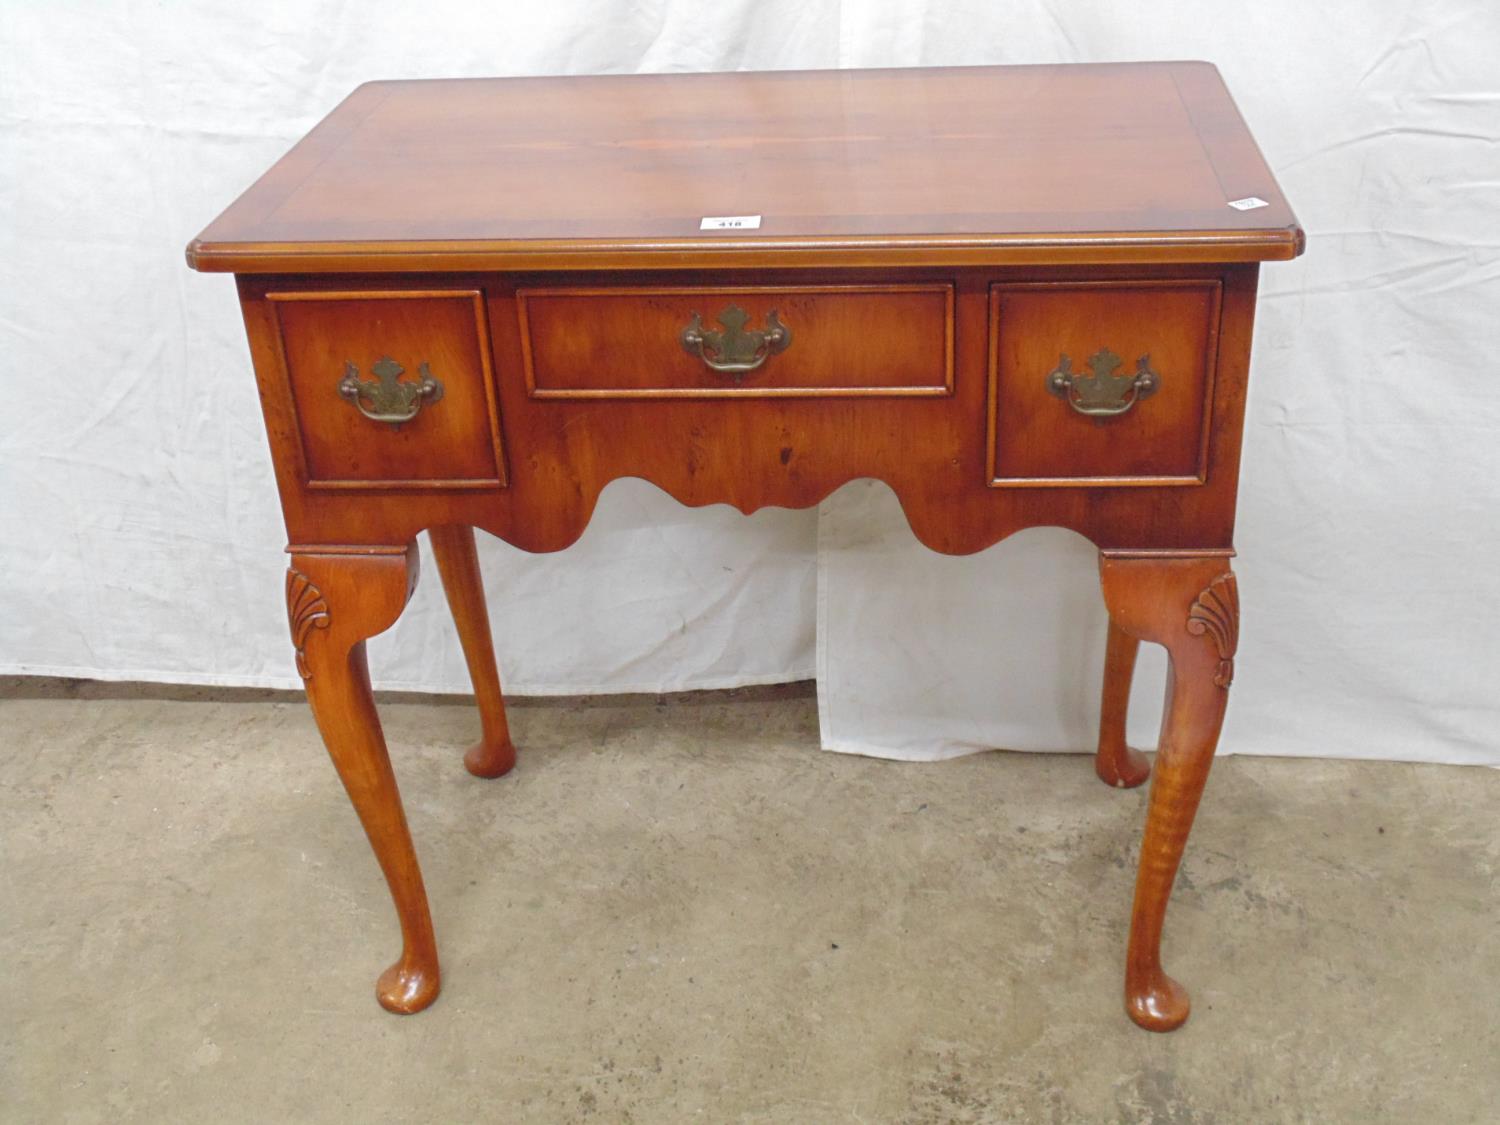 Yewwood lowboy having an arrangement of three drawers with swan neck handles, standing on four